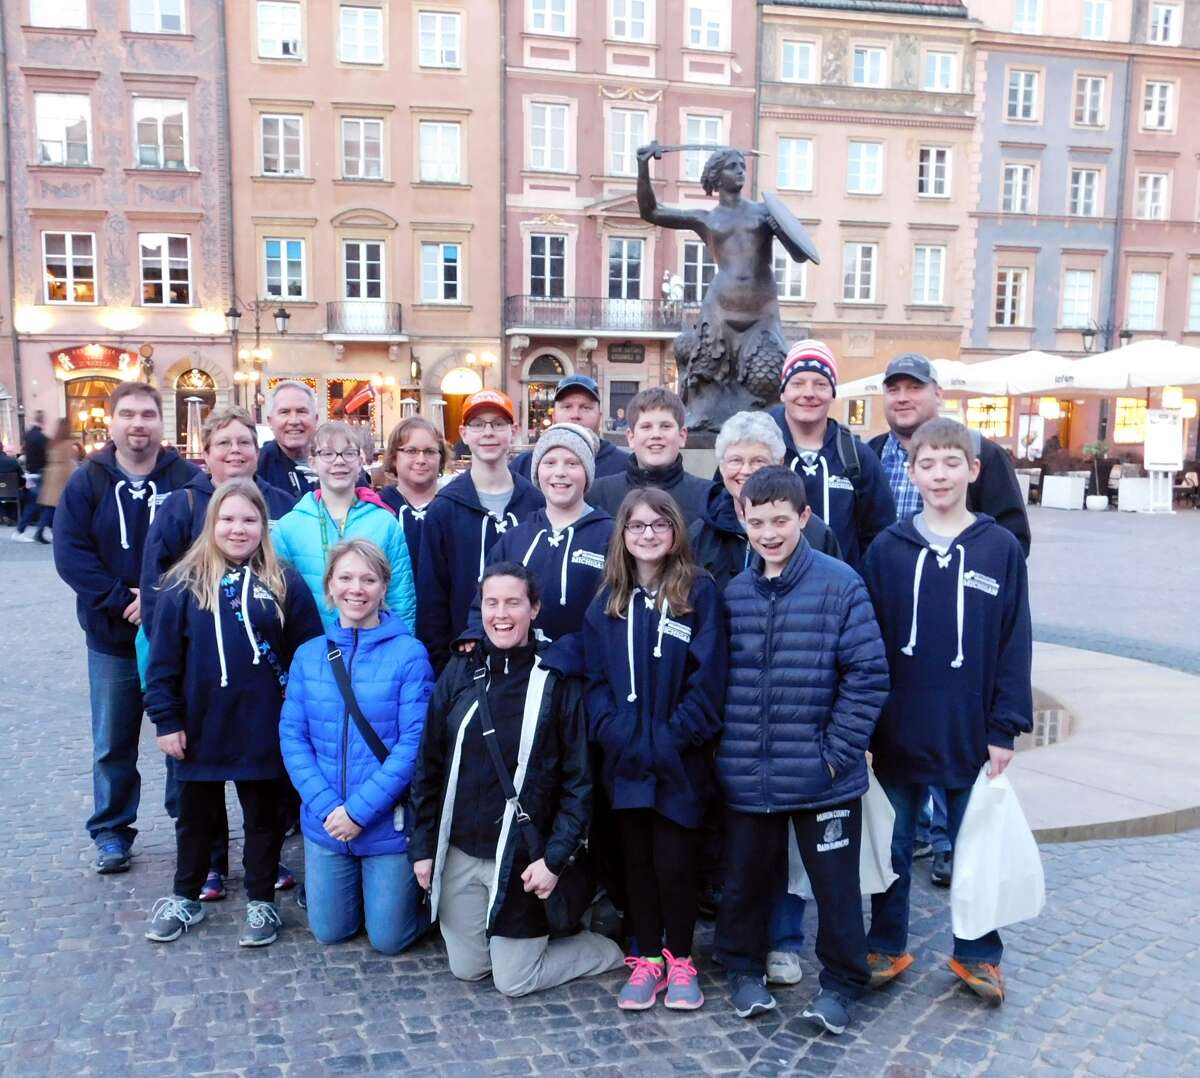 The Bad Axe Destination Imagination team members and their chaperones pose in front of the Symbol of Warsaw statue during their recent visit to Poland last month. (Submitted photo)       